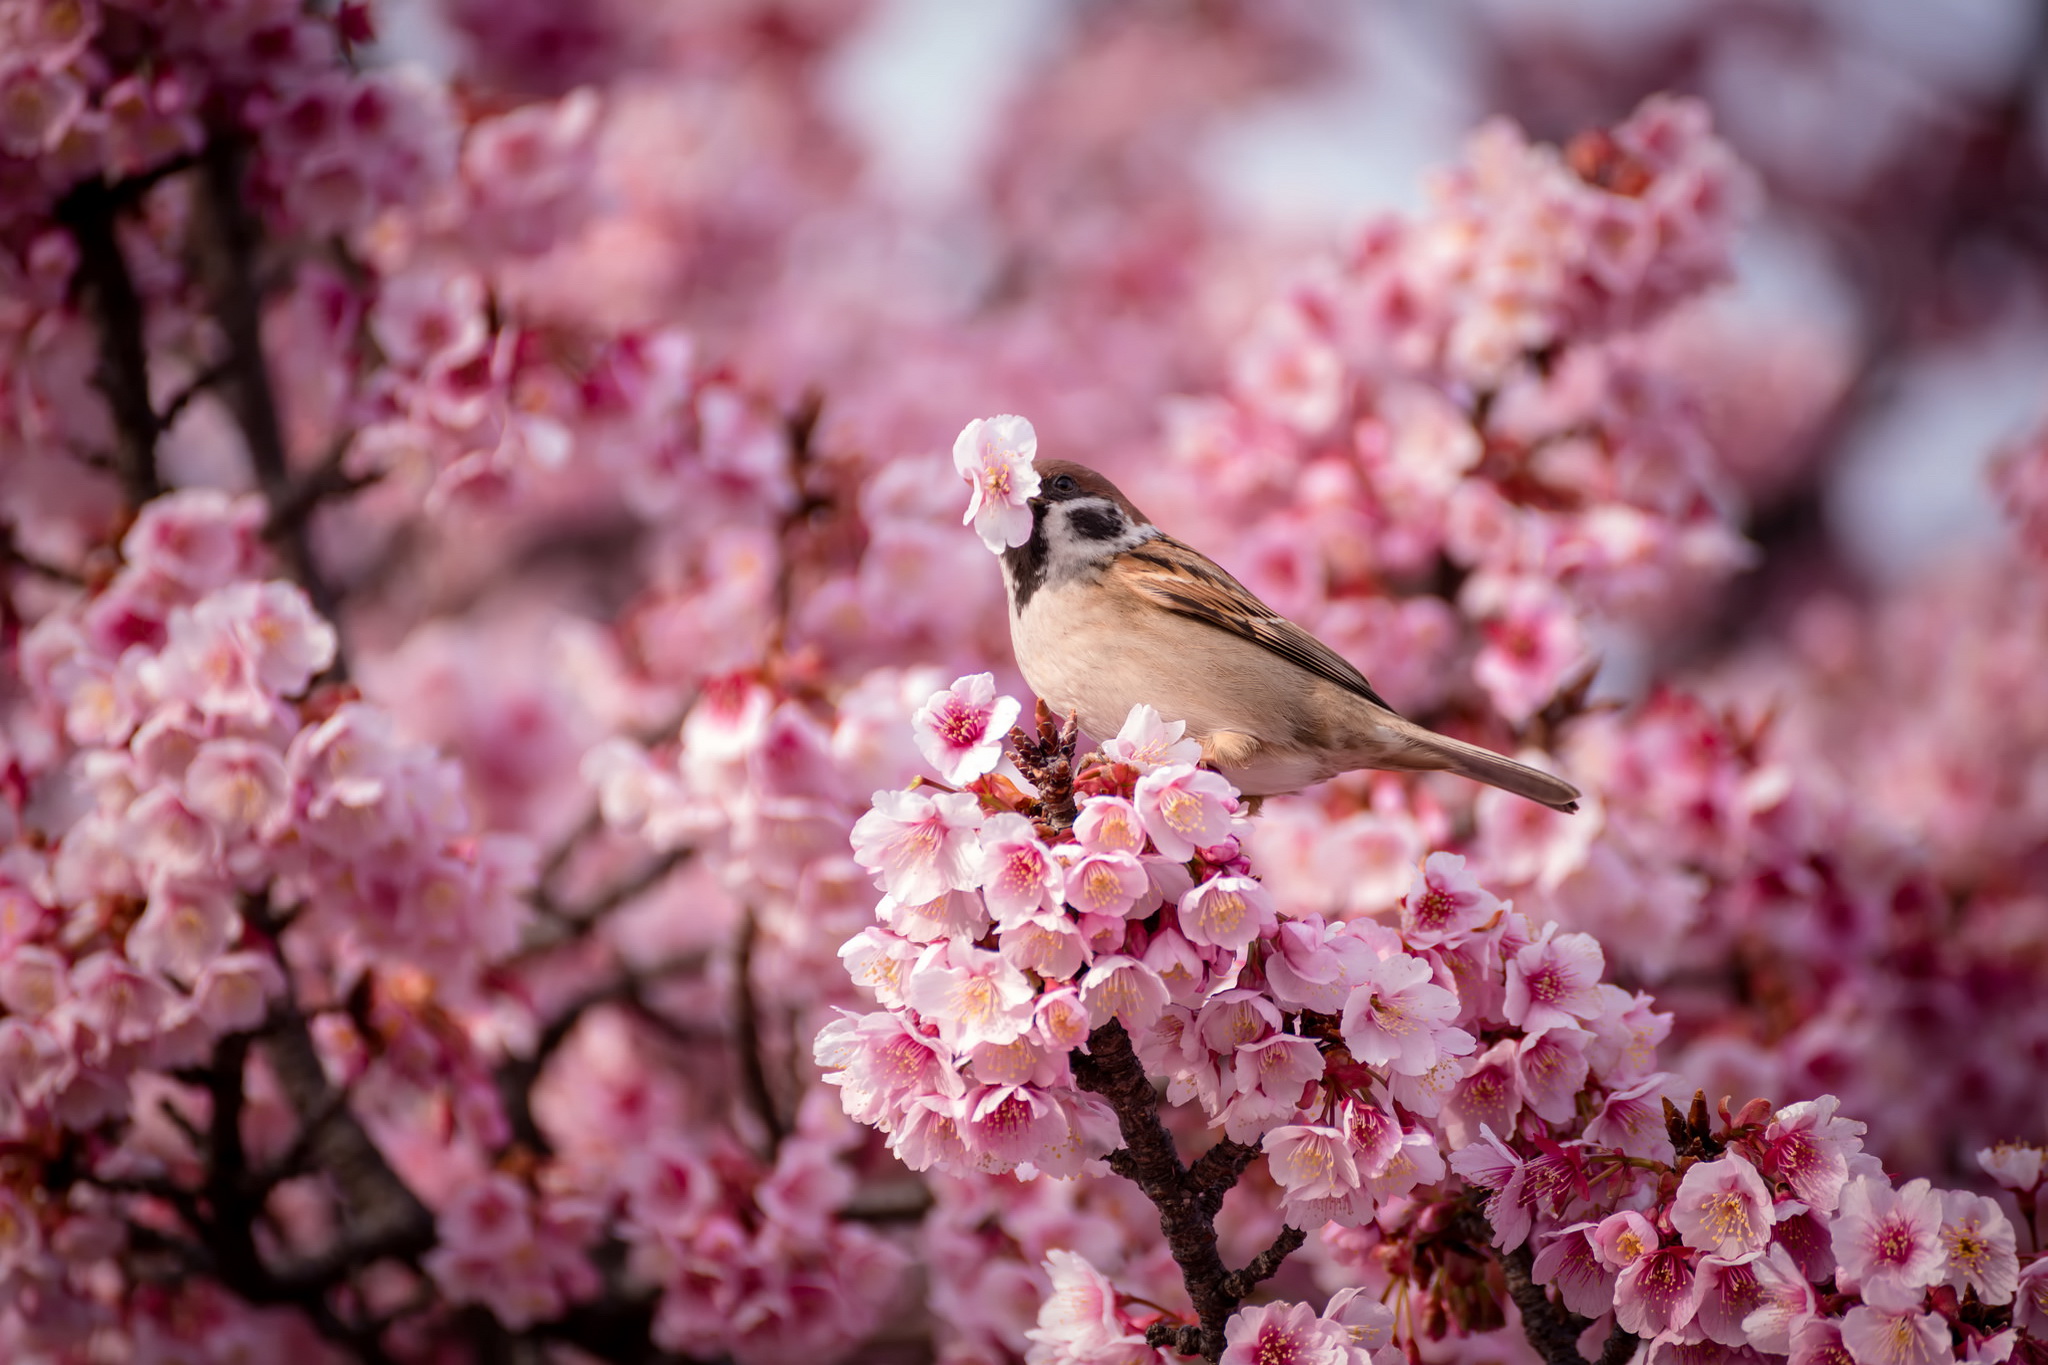 Sparrow on the blooming tree / 2048 x 1365 / Macro / Photography ...